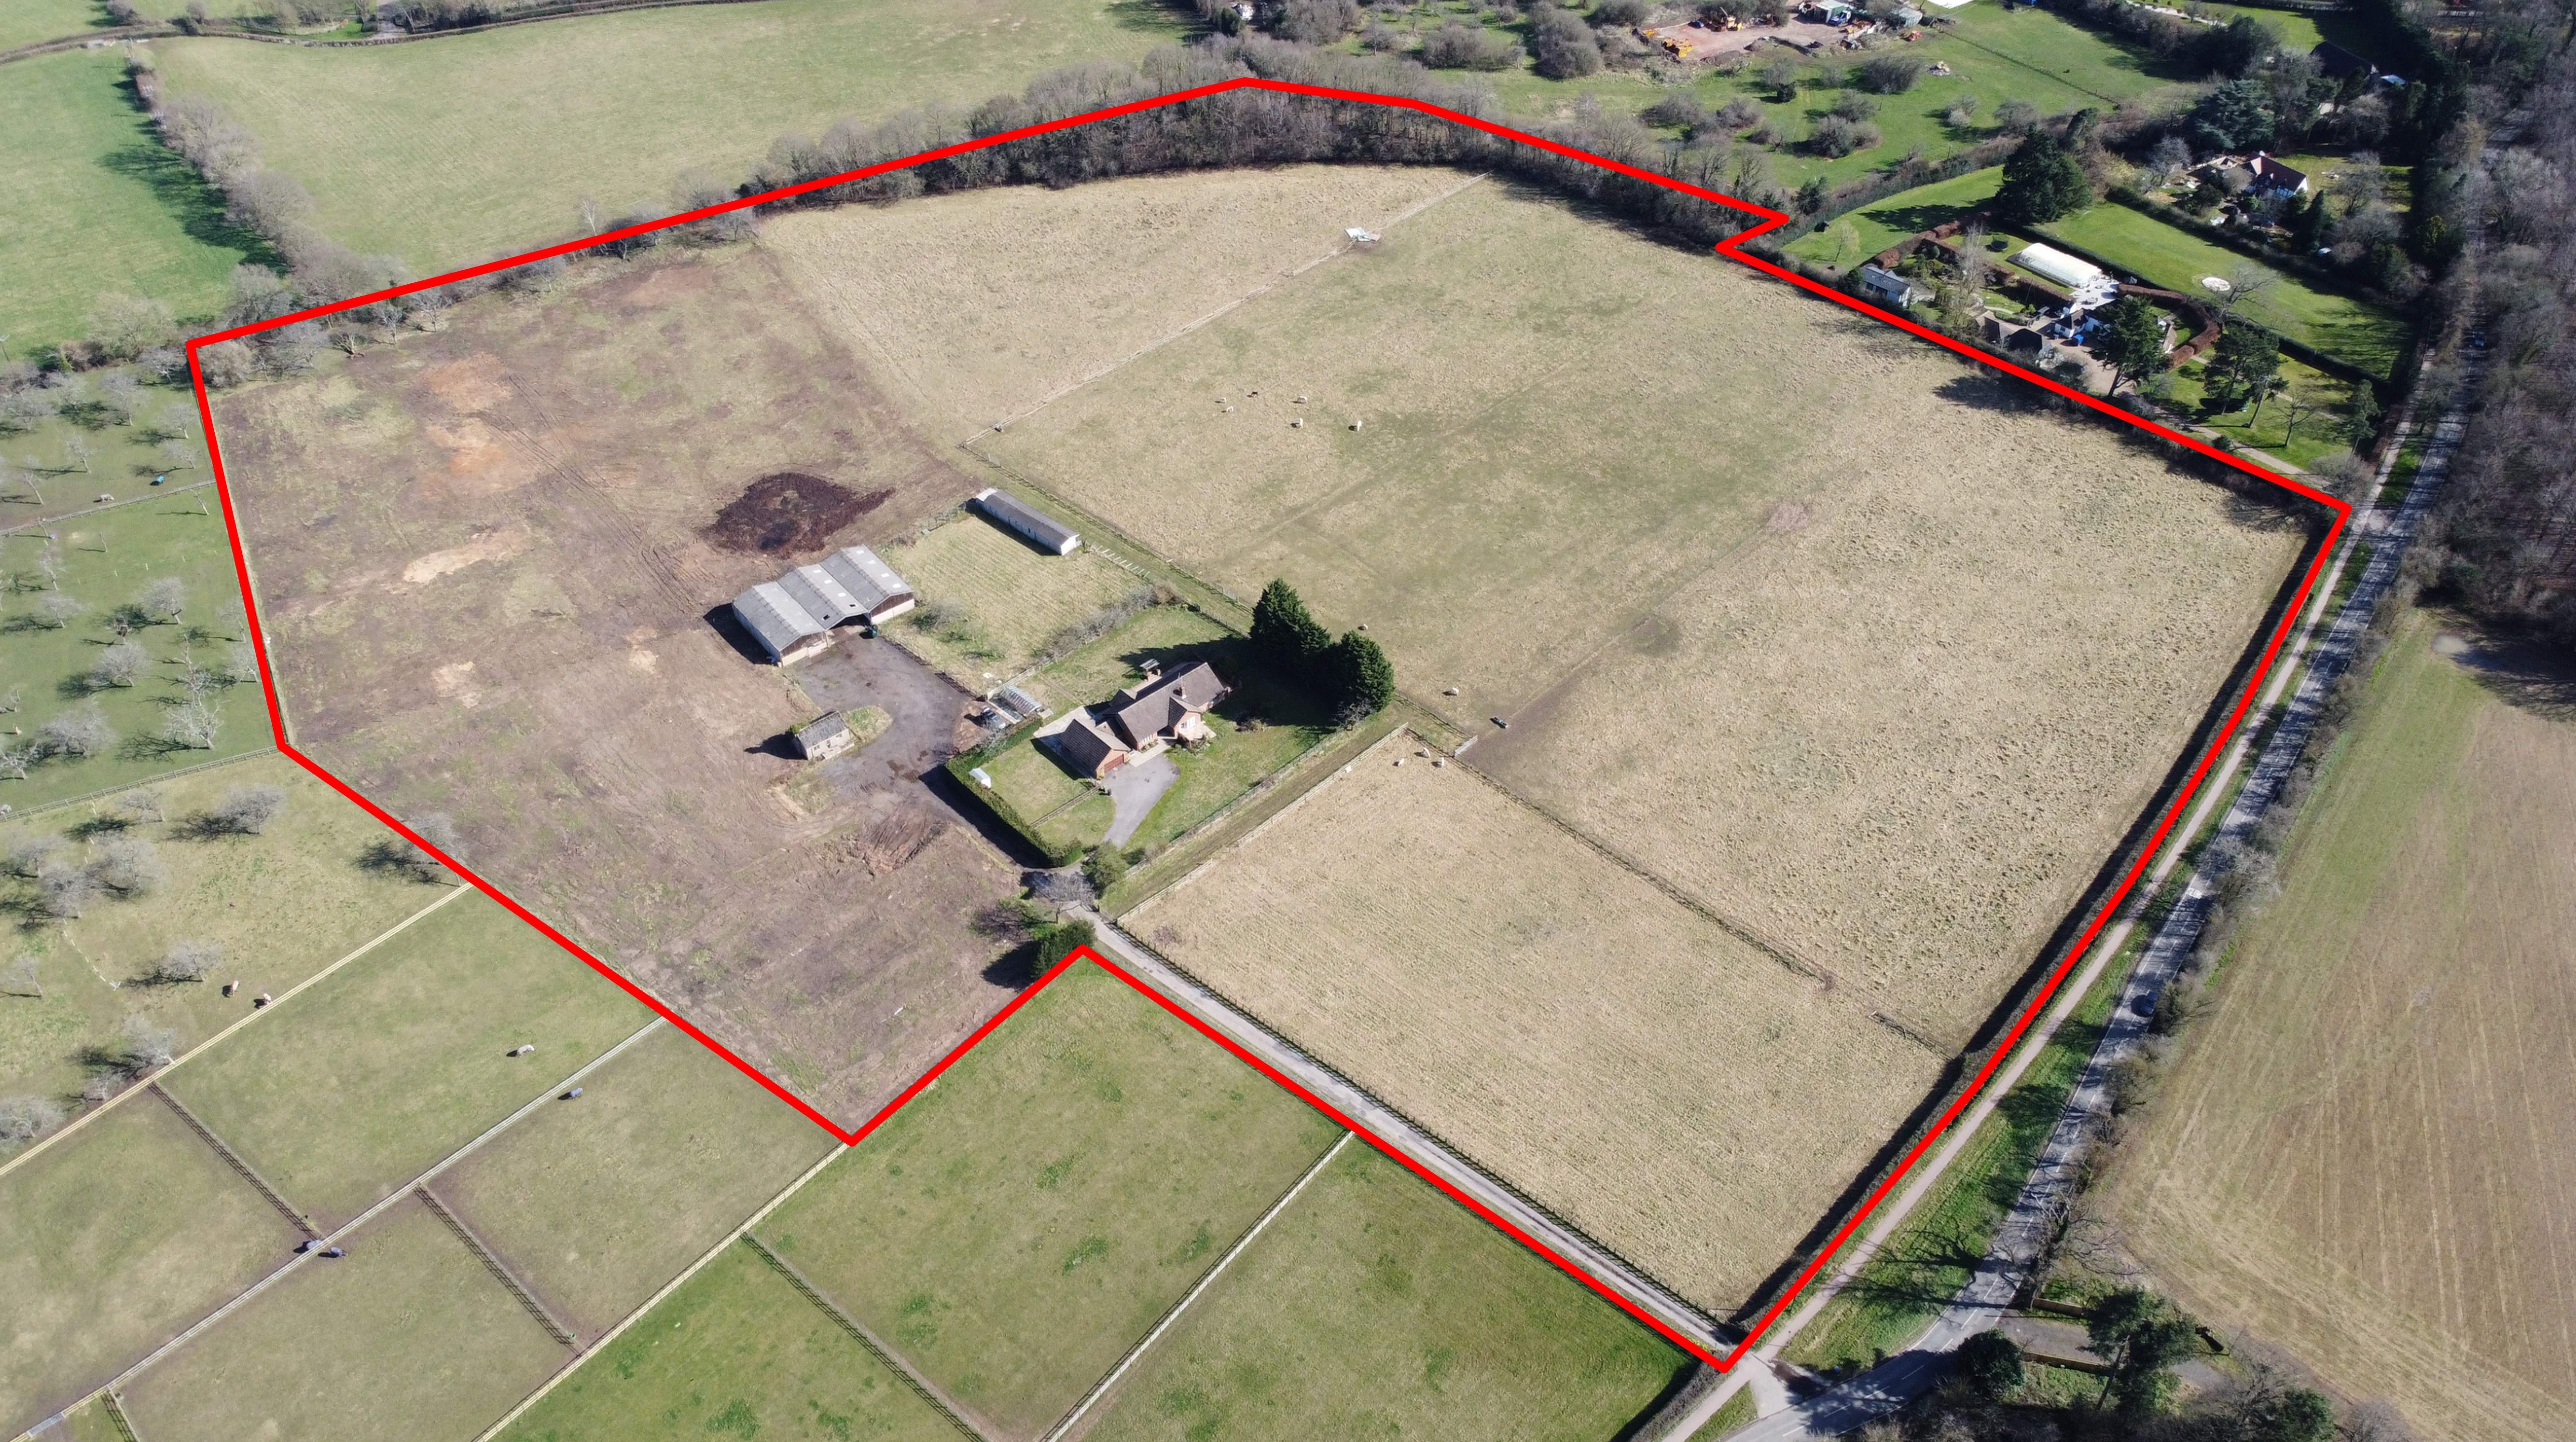 24 ACRE FARM IN CHALFONT ST GILES